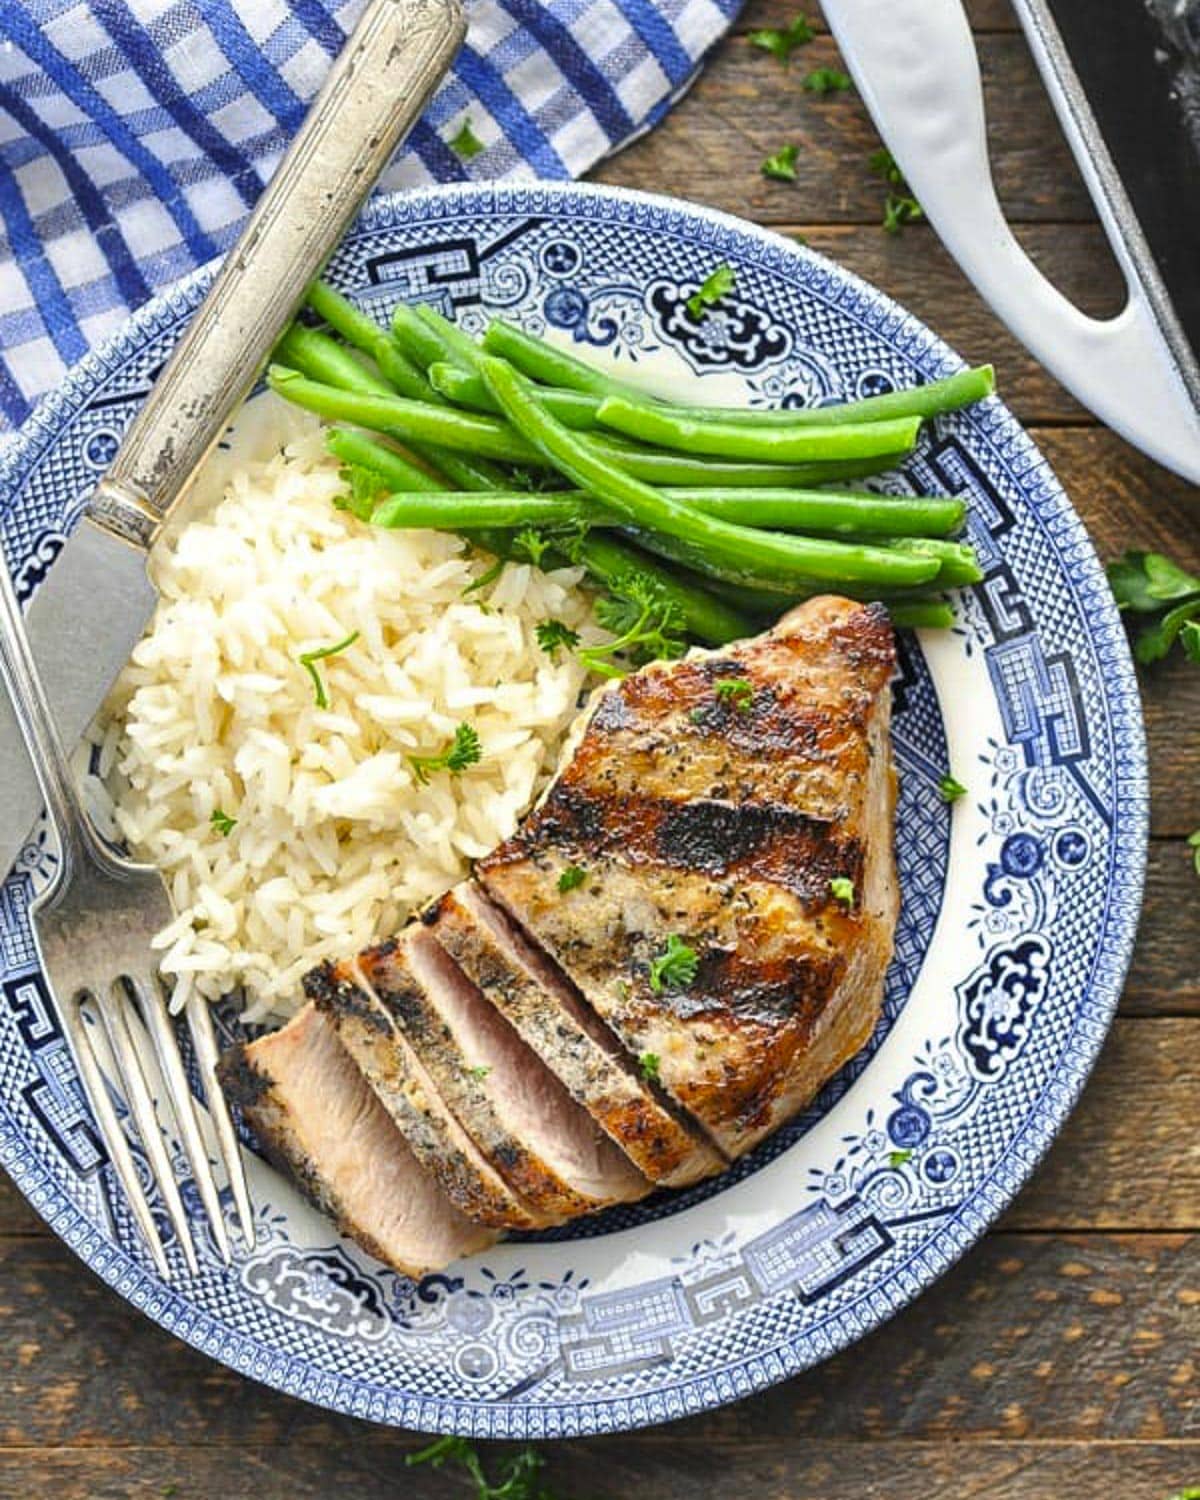 Overhead shot of grilled pork chop on a blue and white plate.